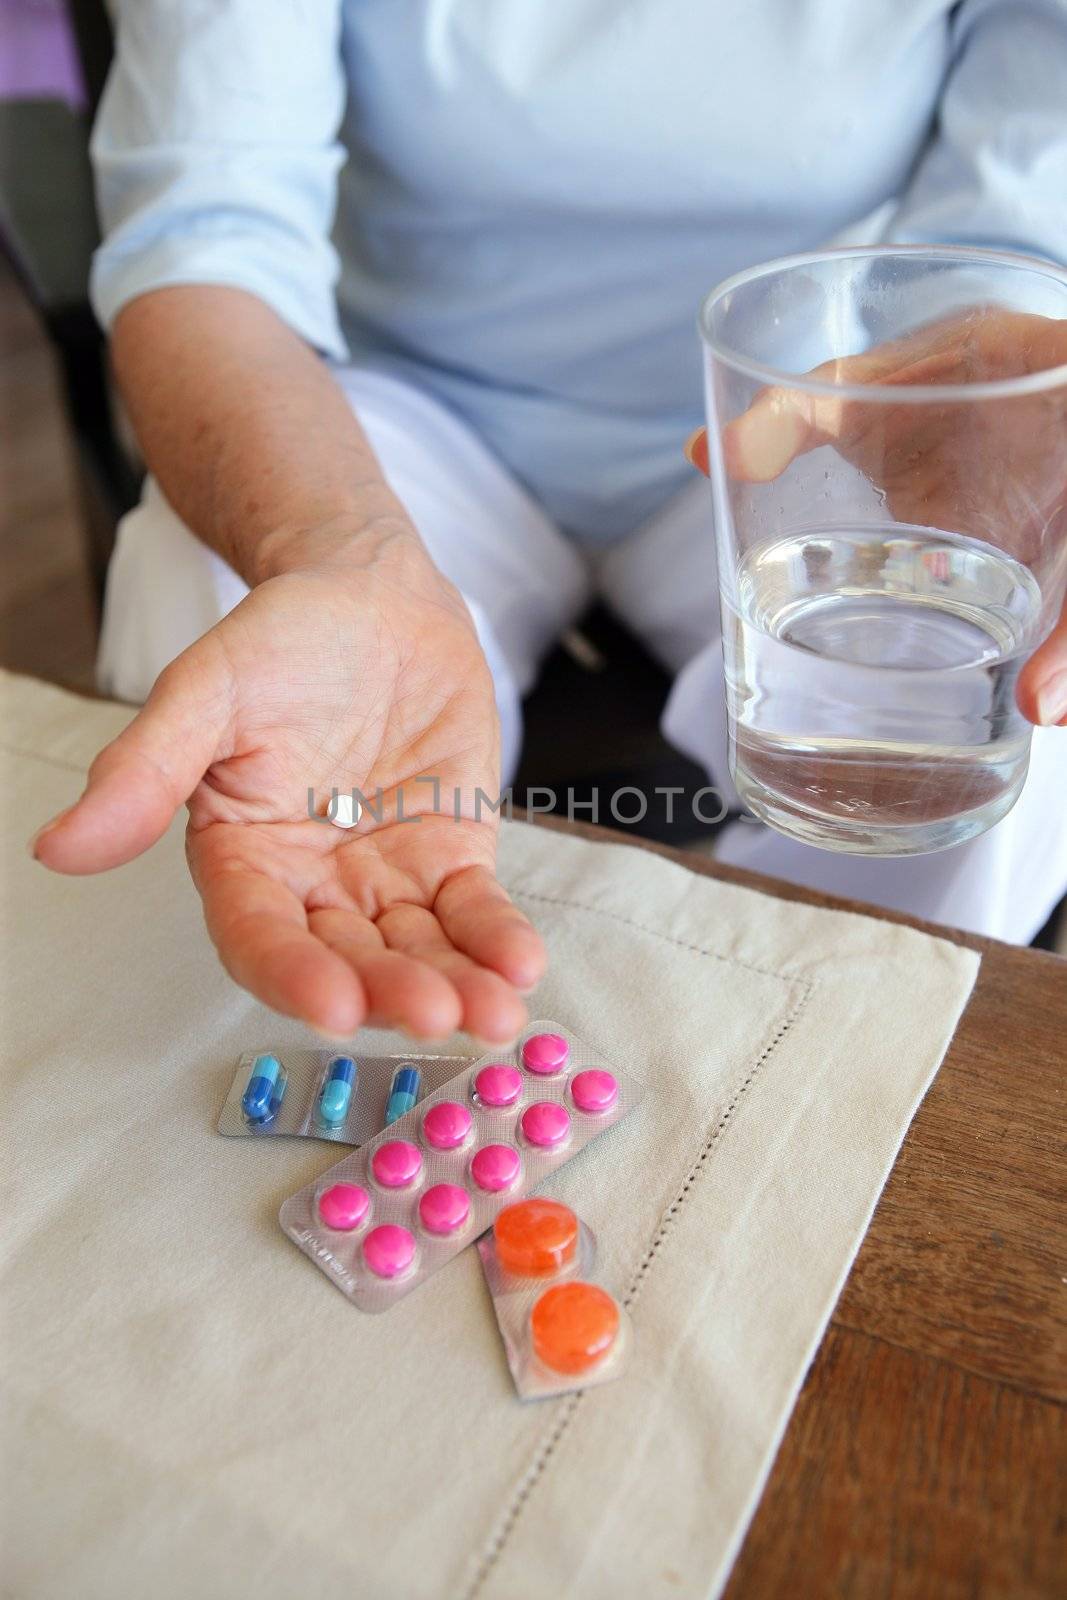 Woman taking her medication with a glass of water